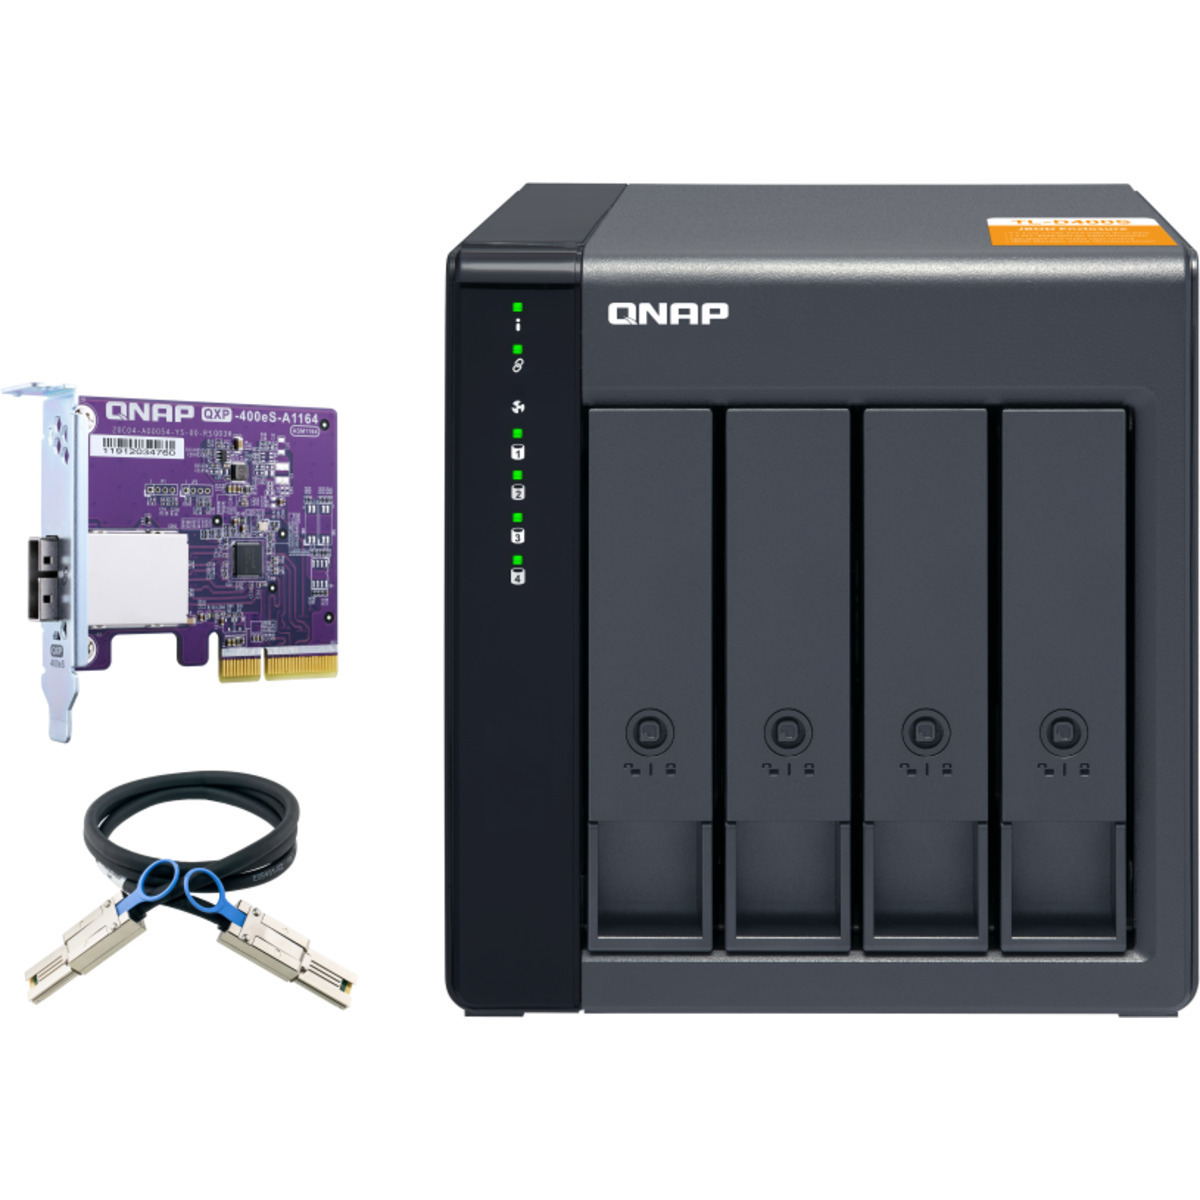 buy $2276 QNAP TL-D400S External Expansion Drive 80tb Desktop Expansion Enclosure 4x20000gb Western Digital Ultrastar DC HC560 WUH722020ALE6L4 3.5 7200rpm SATA 6Gb/s HDD ENTERPRISE Class Drives Installed - Burn-In Tested - nas headquarters buy network attached storage server device das new raid-5 free shipping simply usa TL-D400S External Expansion Drive